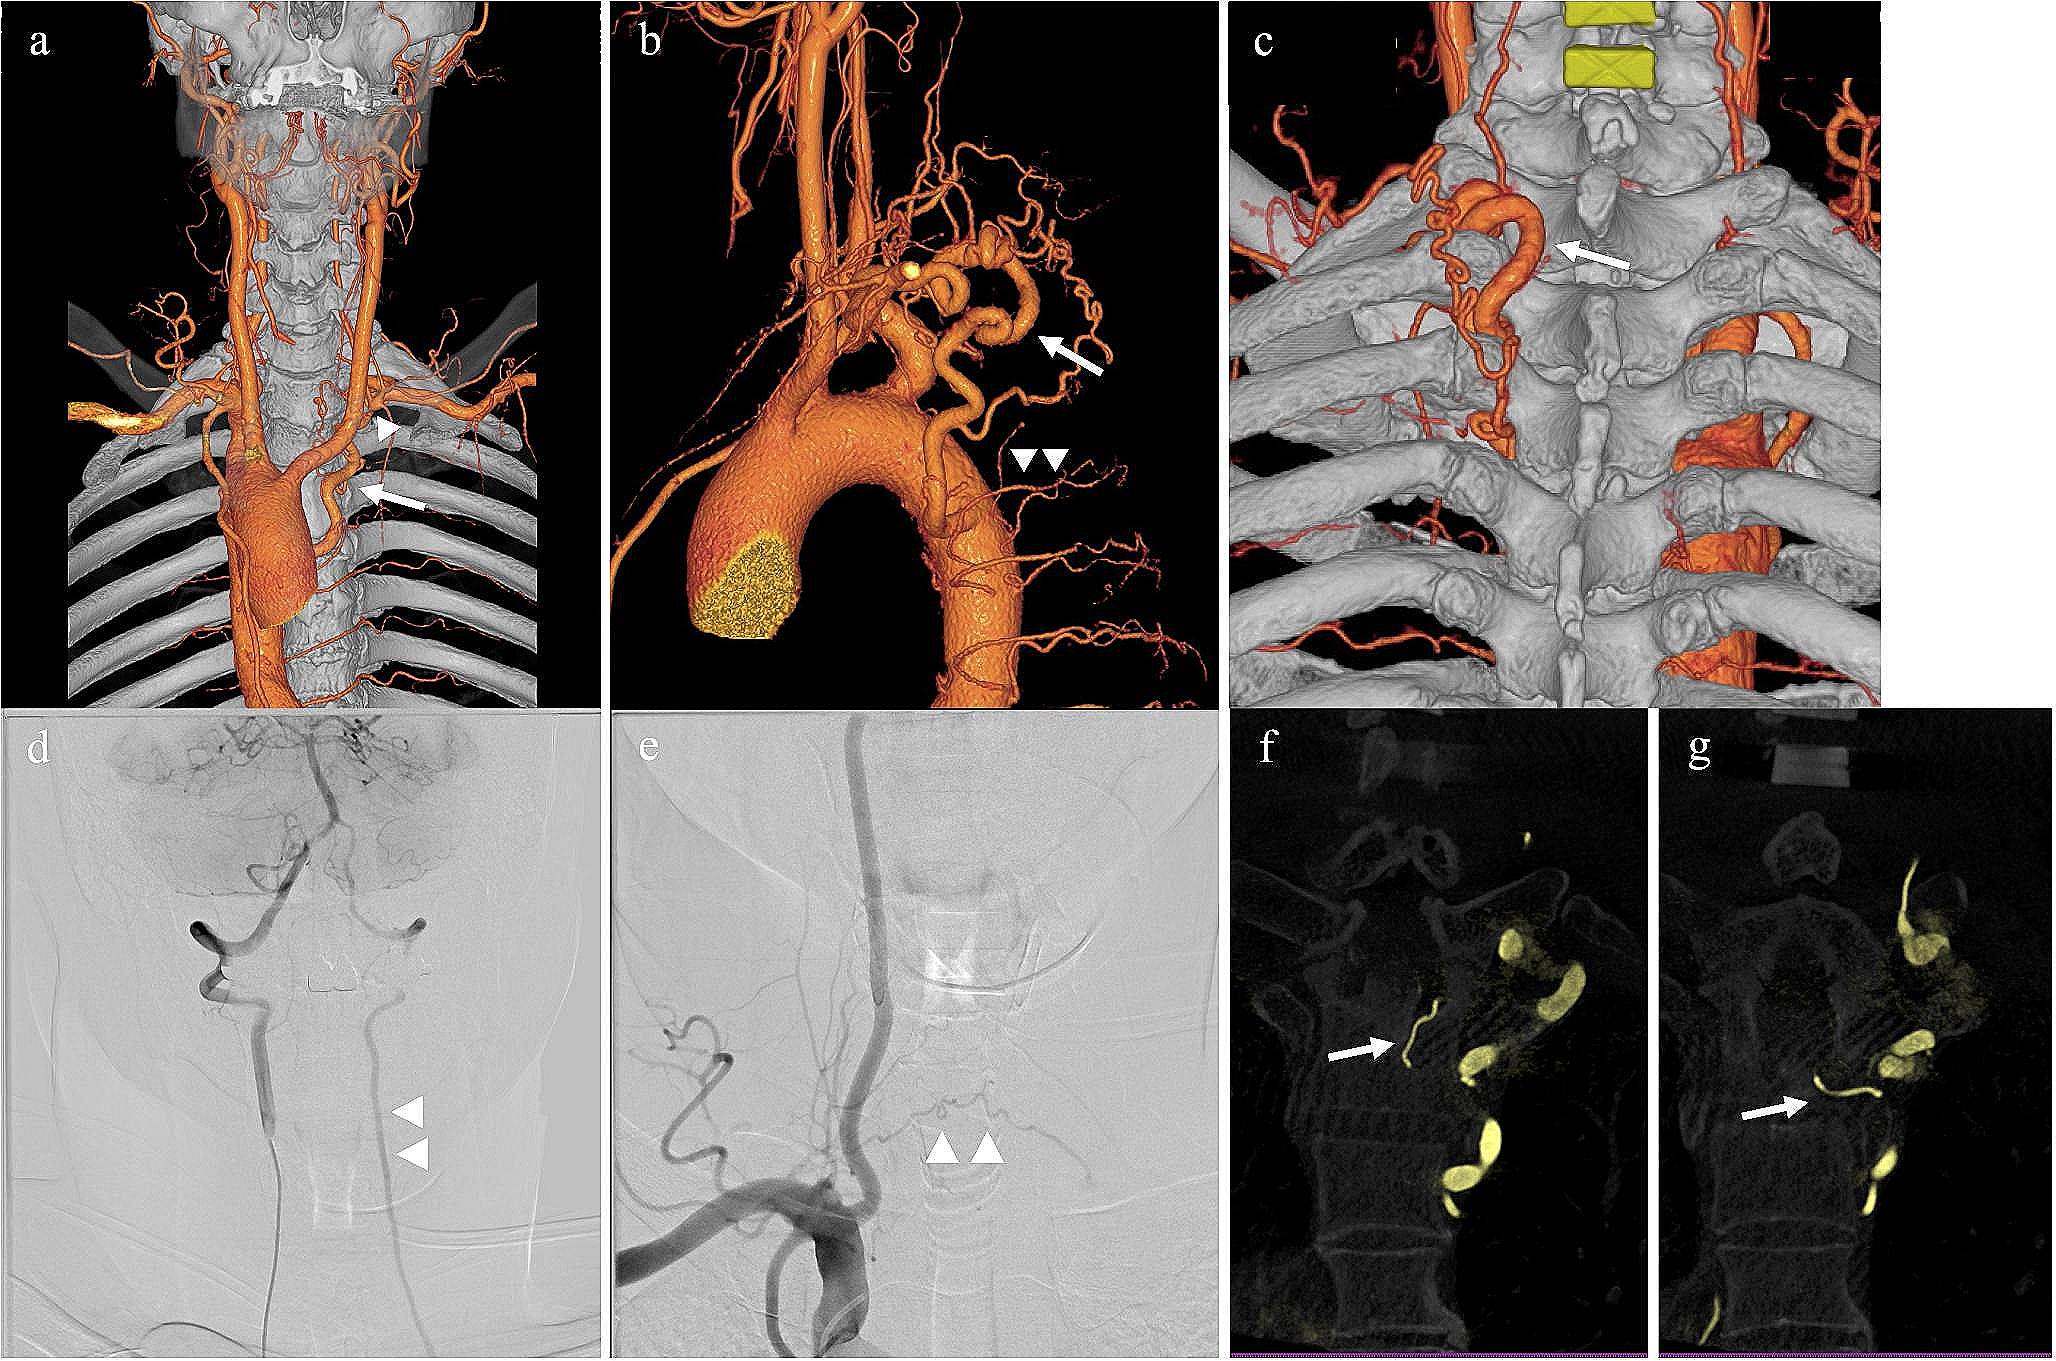 Dysplastic aberrant left subclavian artery originating from a thoracic intersegmental artery associated with a right aortic arch